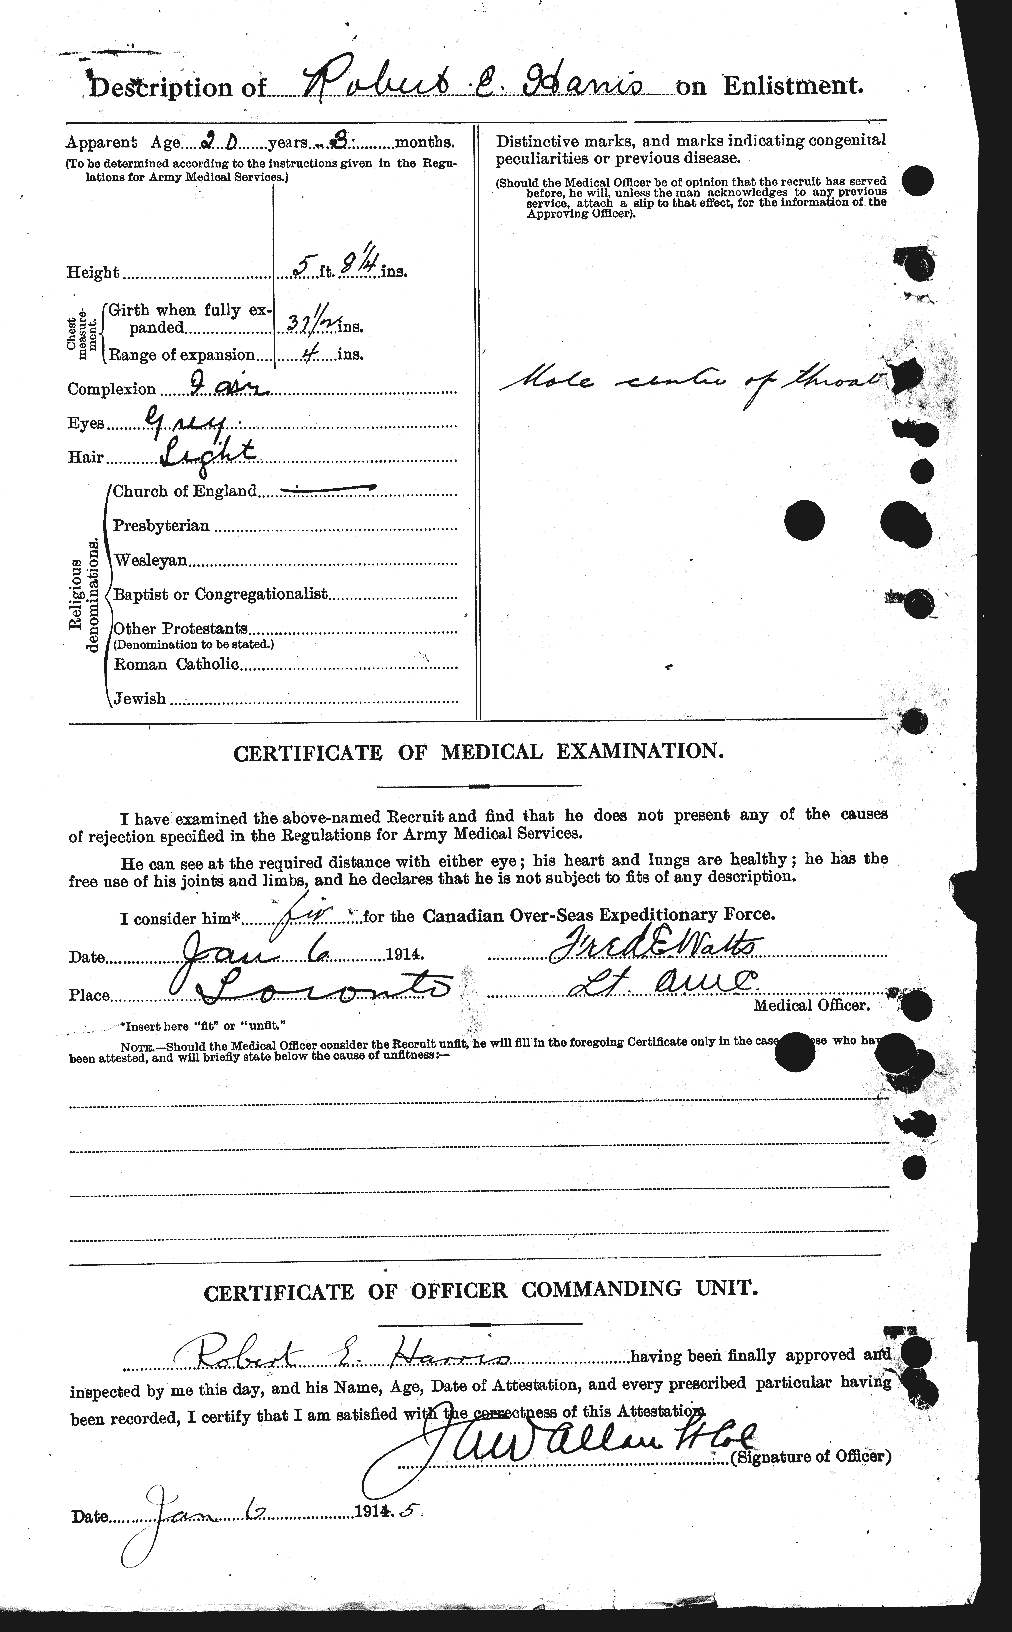 Personnel Records of the First World War - CEF 378153b